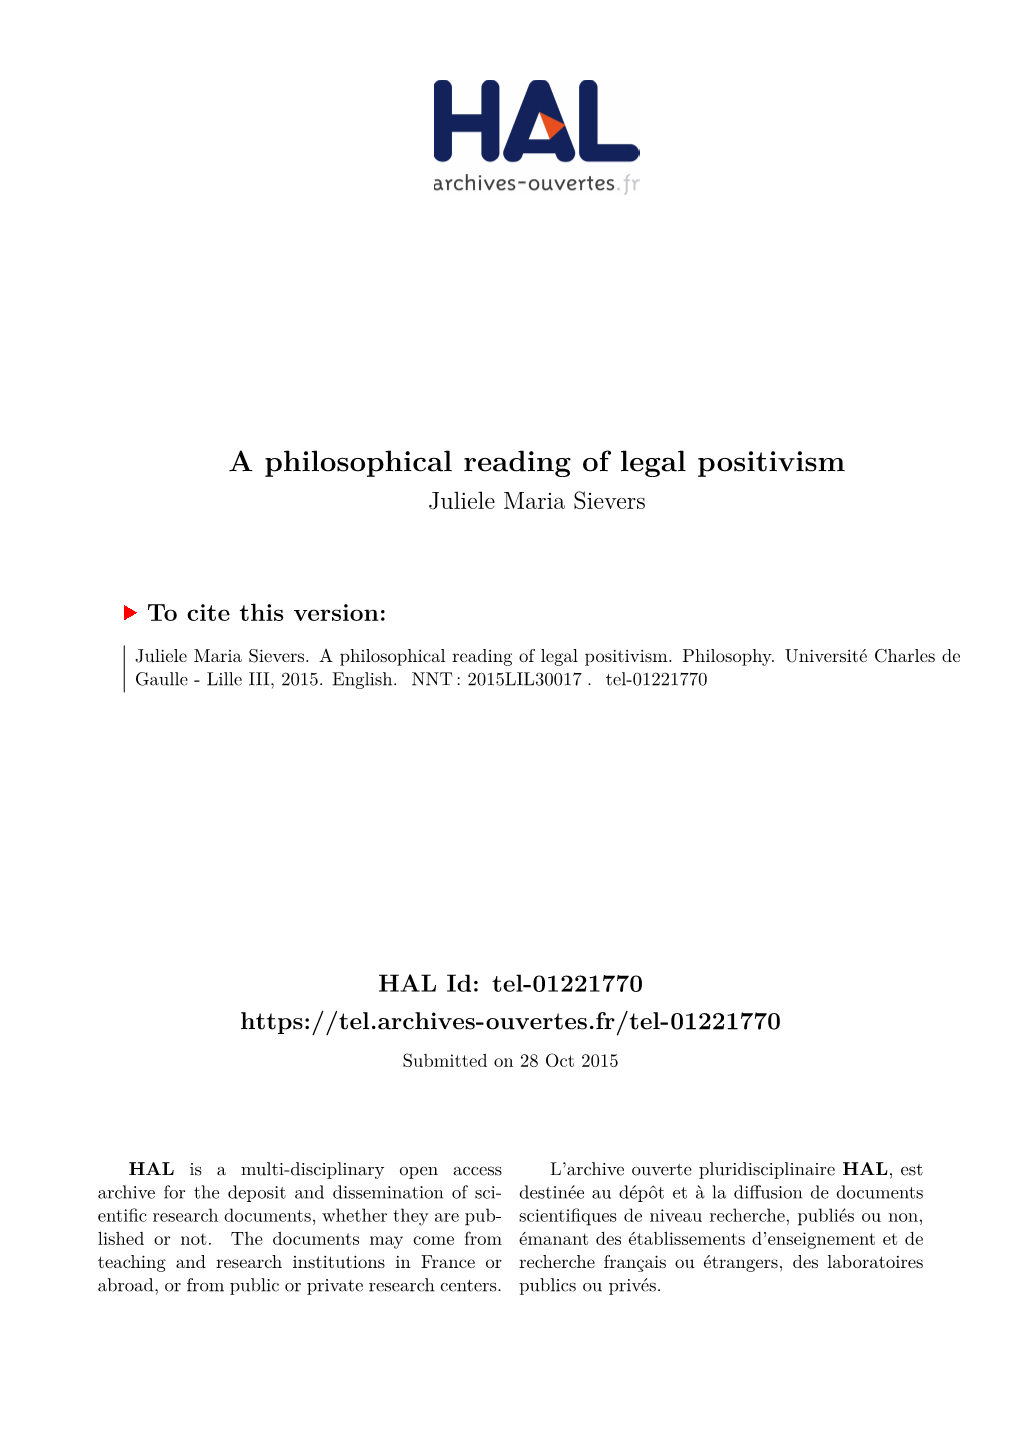 A Philosophical Reading of Legal Positivism Juliele Maria Sievers